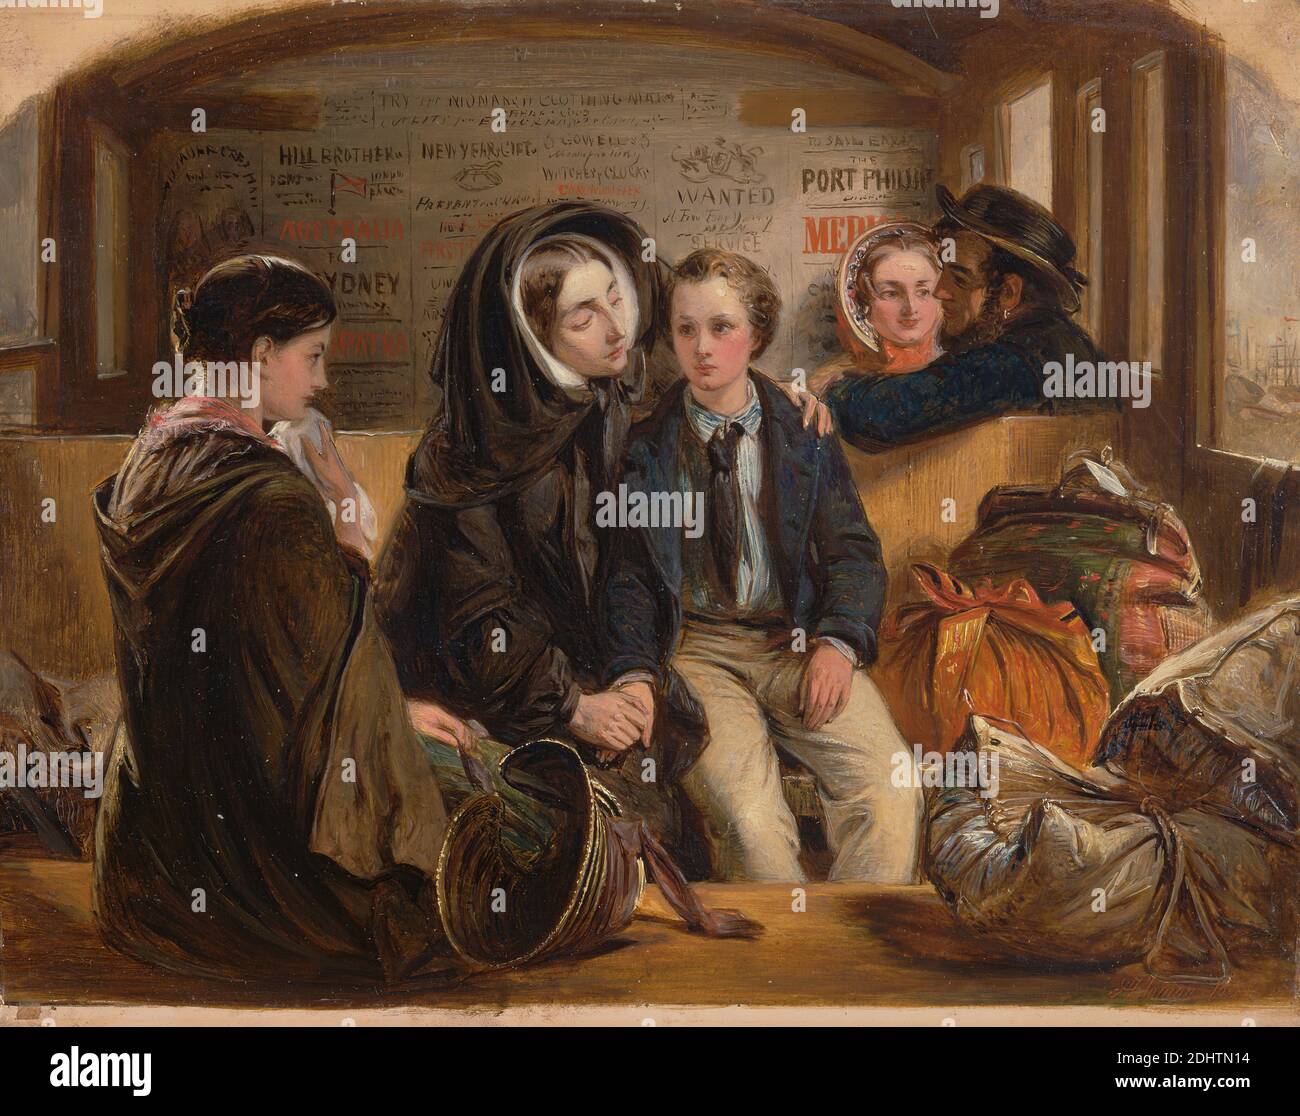 Second Class—The Parting. 'Thus part we rich in sorrow, parting poor.', Abraham Solomon, 1824–1862, British, 1855, Oil on panel, Support (PTG): 8 x 10 inches (20.3 x 25.4 cm), advertisements, baby, bags, benches, bonnet, capote, children, conversation piece, couple, cravat, family, genre subject, hat, headcloth (headgear), luggage, mother, seamen, separation, son, sorrow, train, transportation, travel, trousers, window, woman Stock Photo